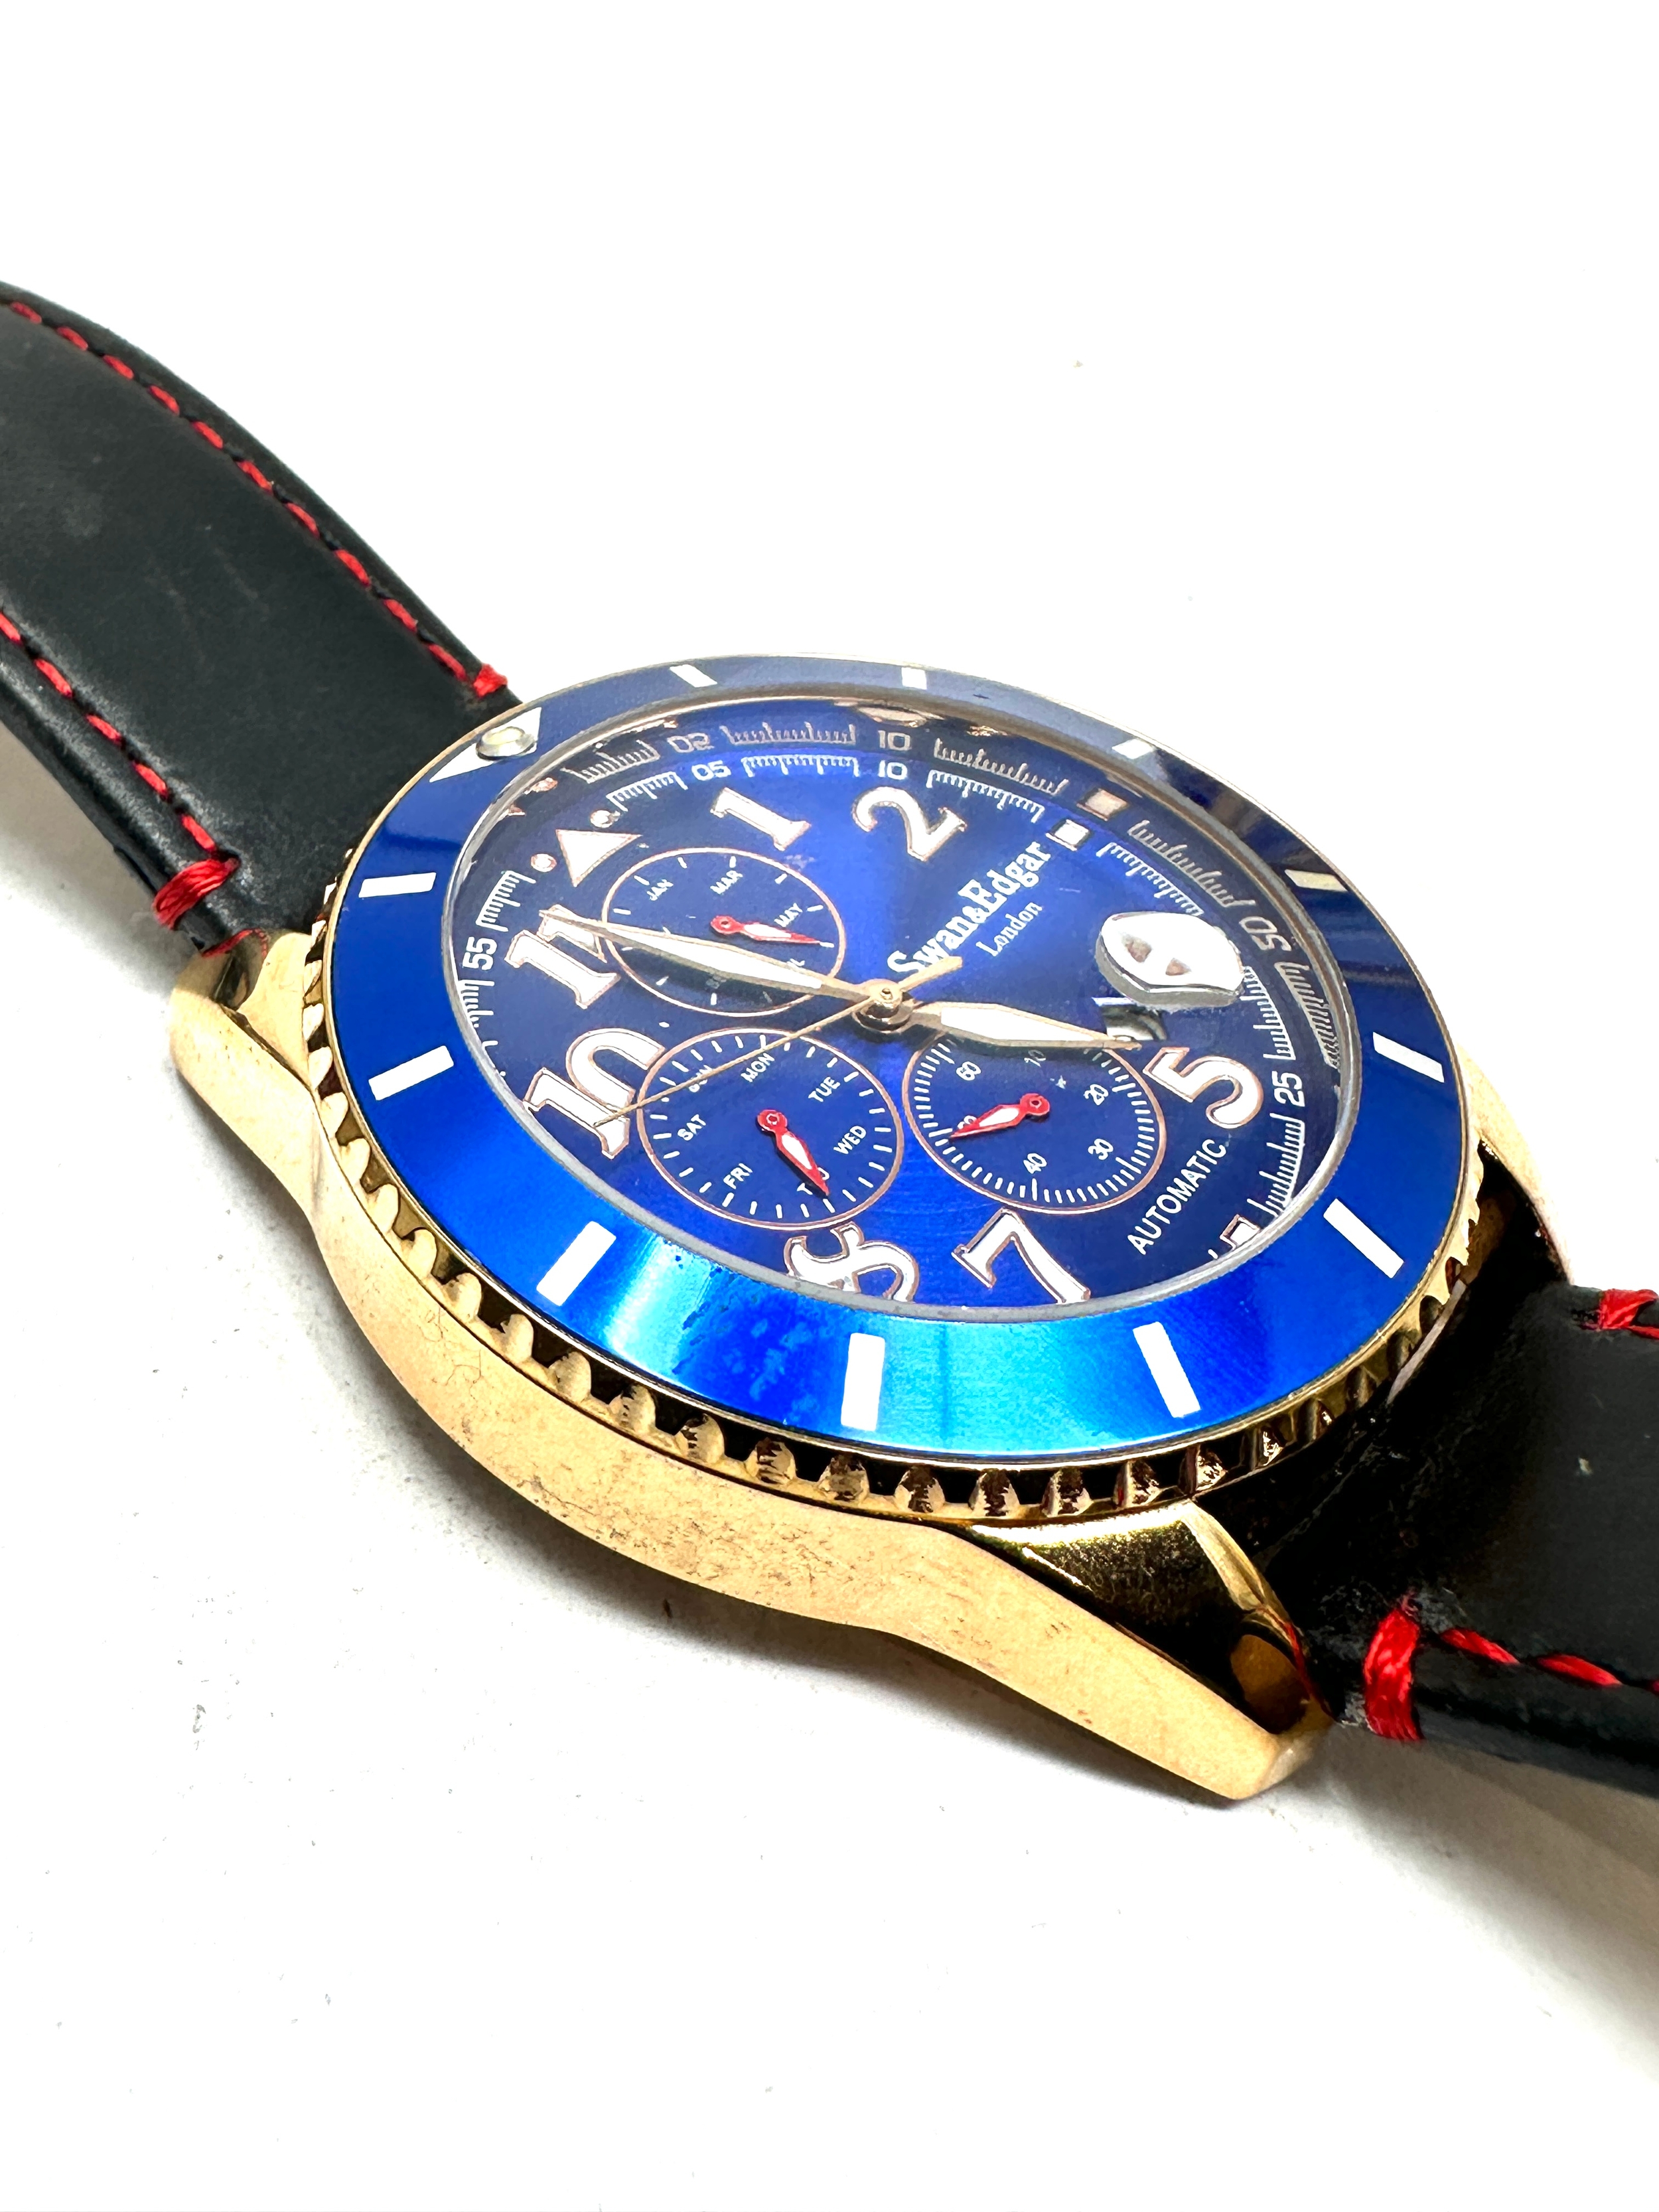 Gents swan edgar london automatic chronograph wristwatch the watch is ticking - Image 3 of 5